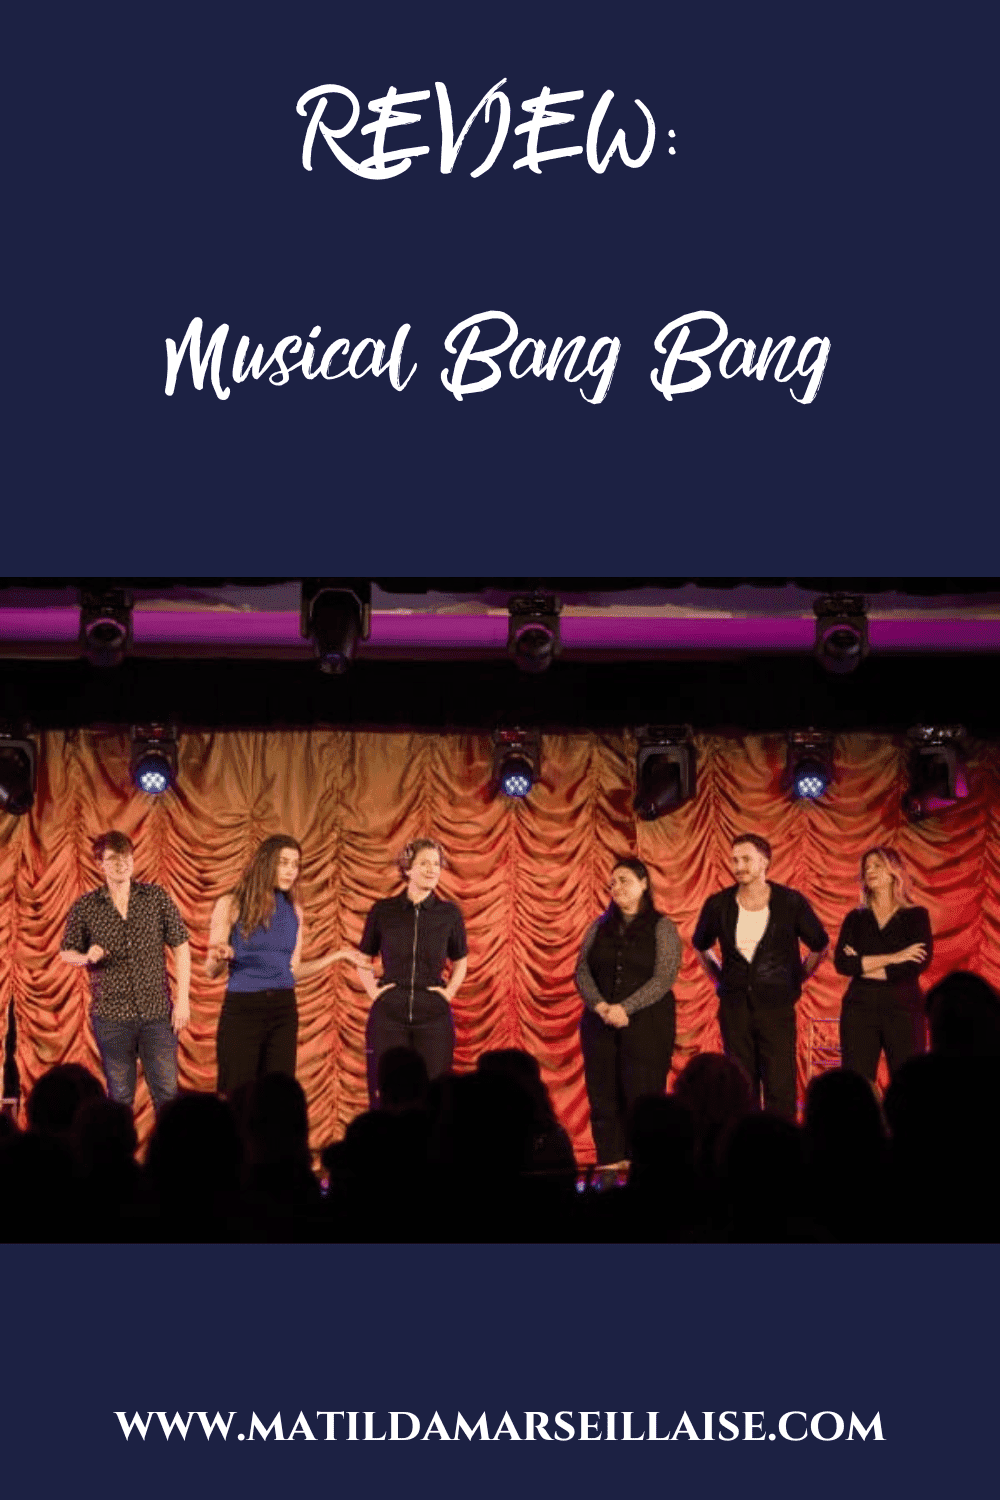 Musical Bang Bang is a ridiculously fun hour of unscripted madness